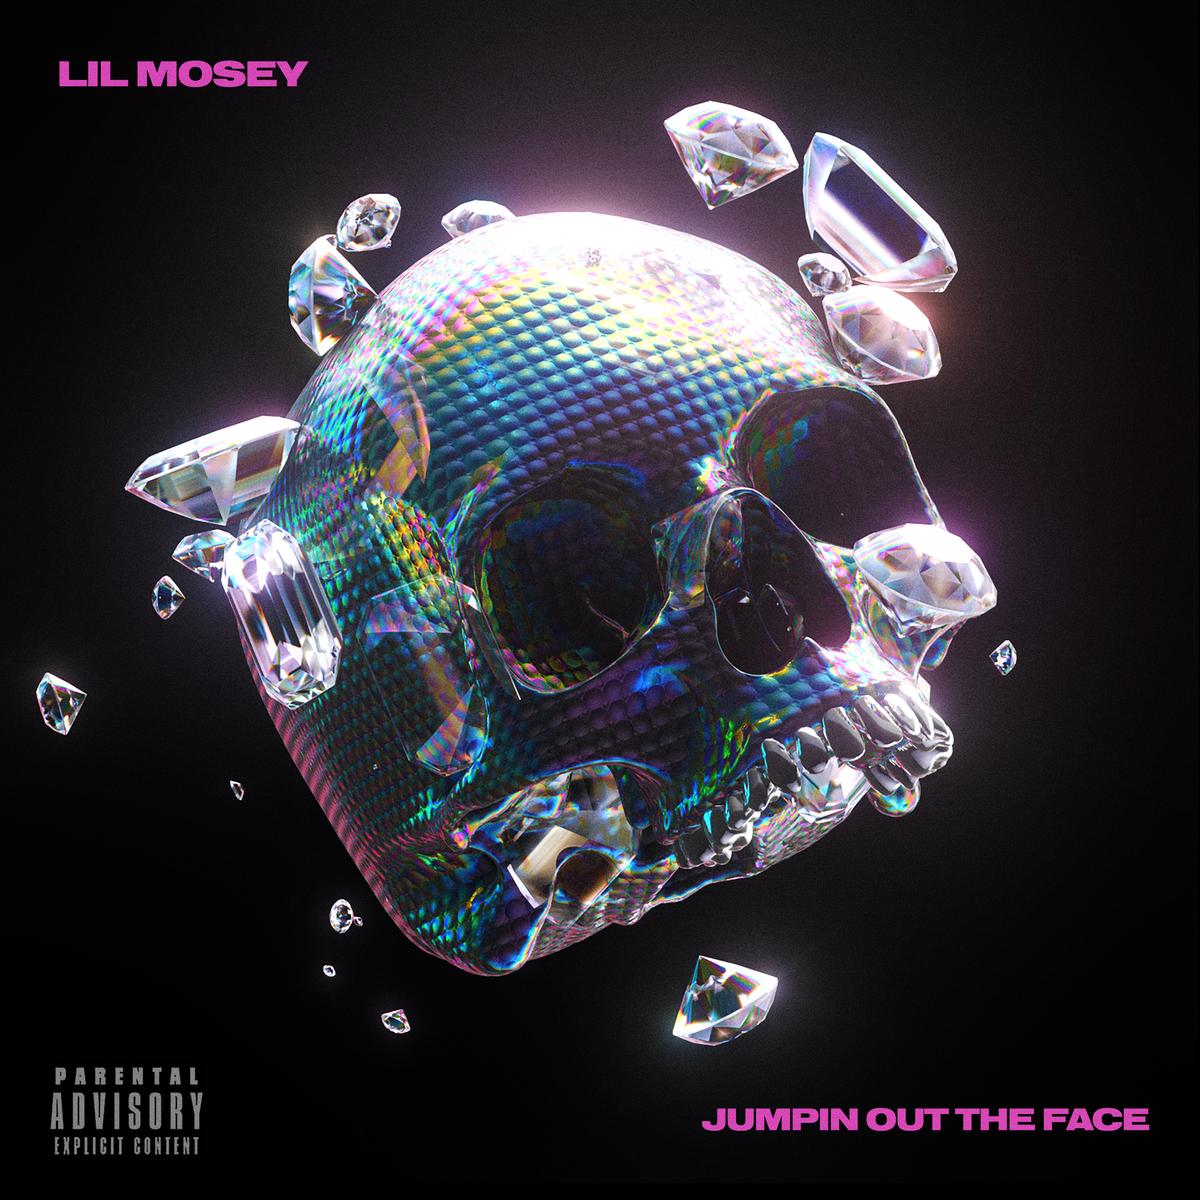 Lil Mosey Returns With “Jumpin Out The Face”